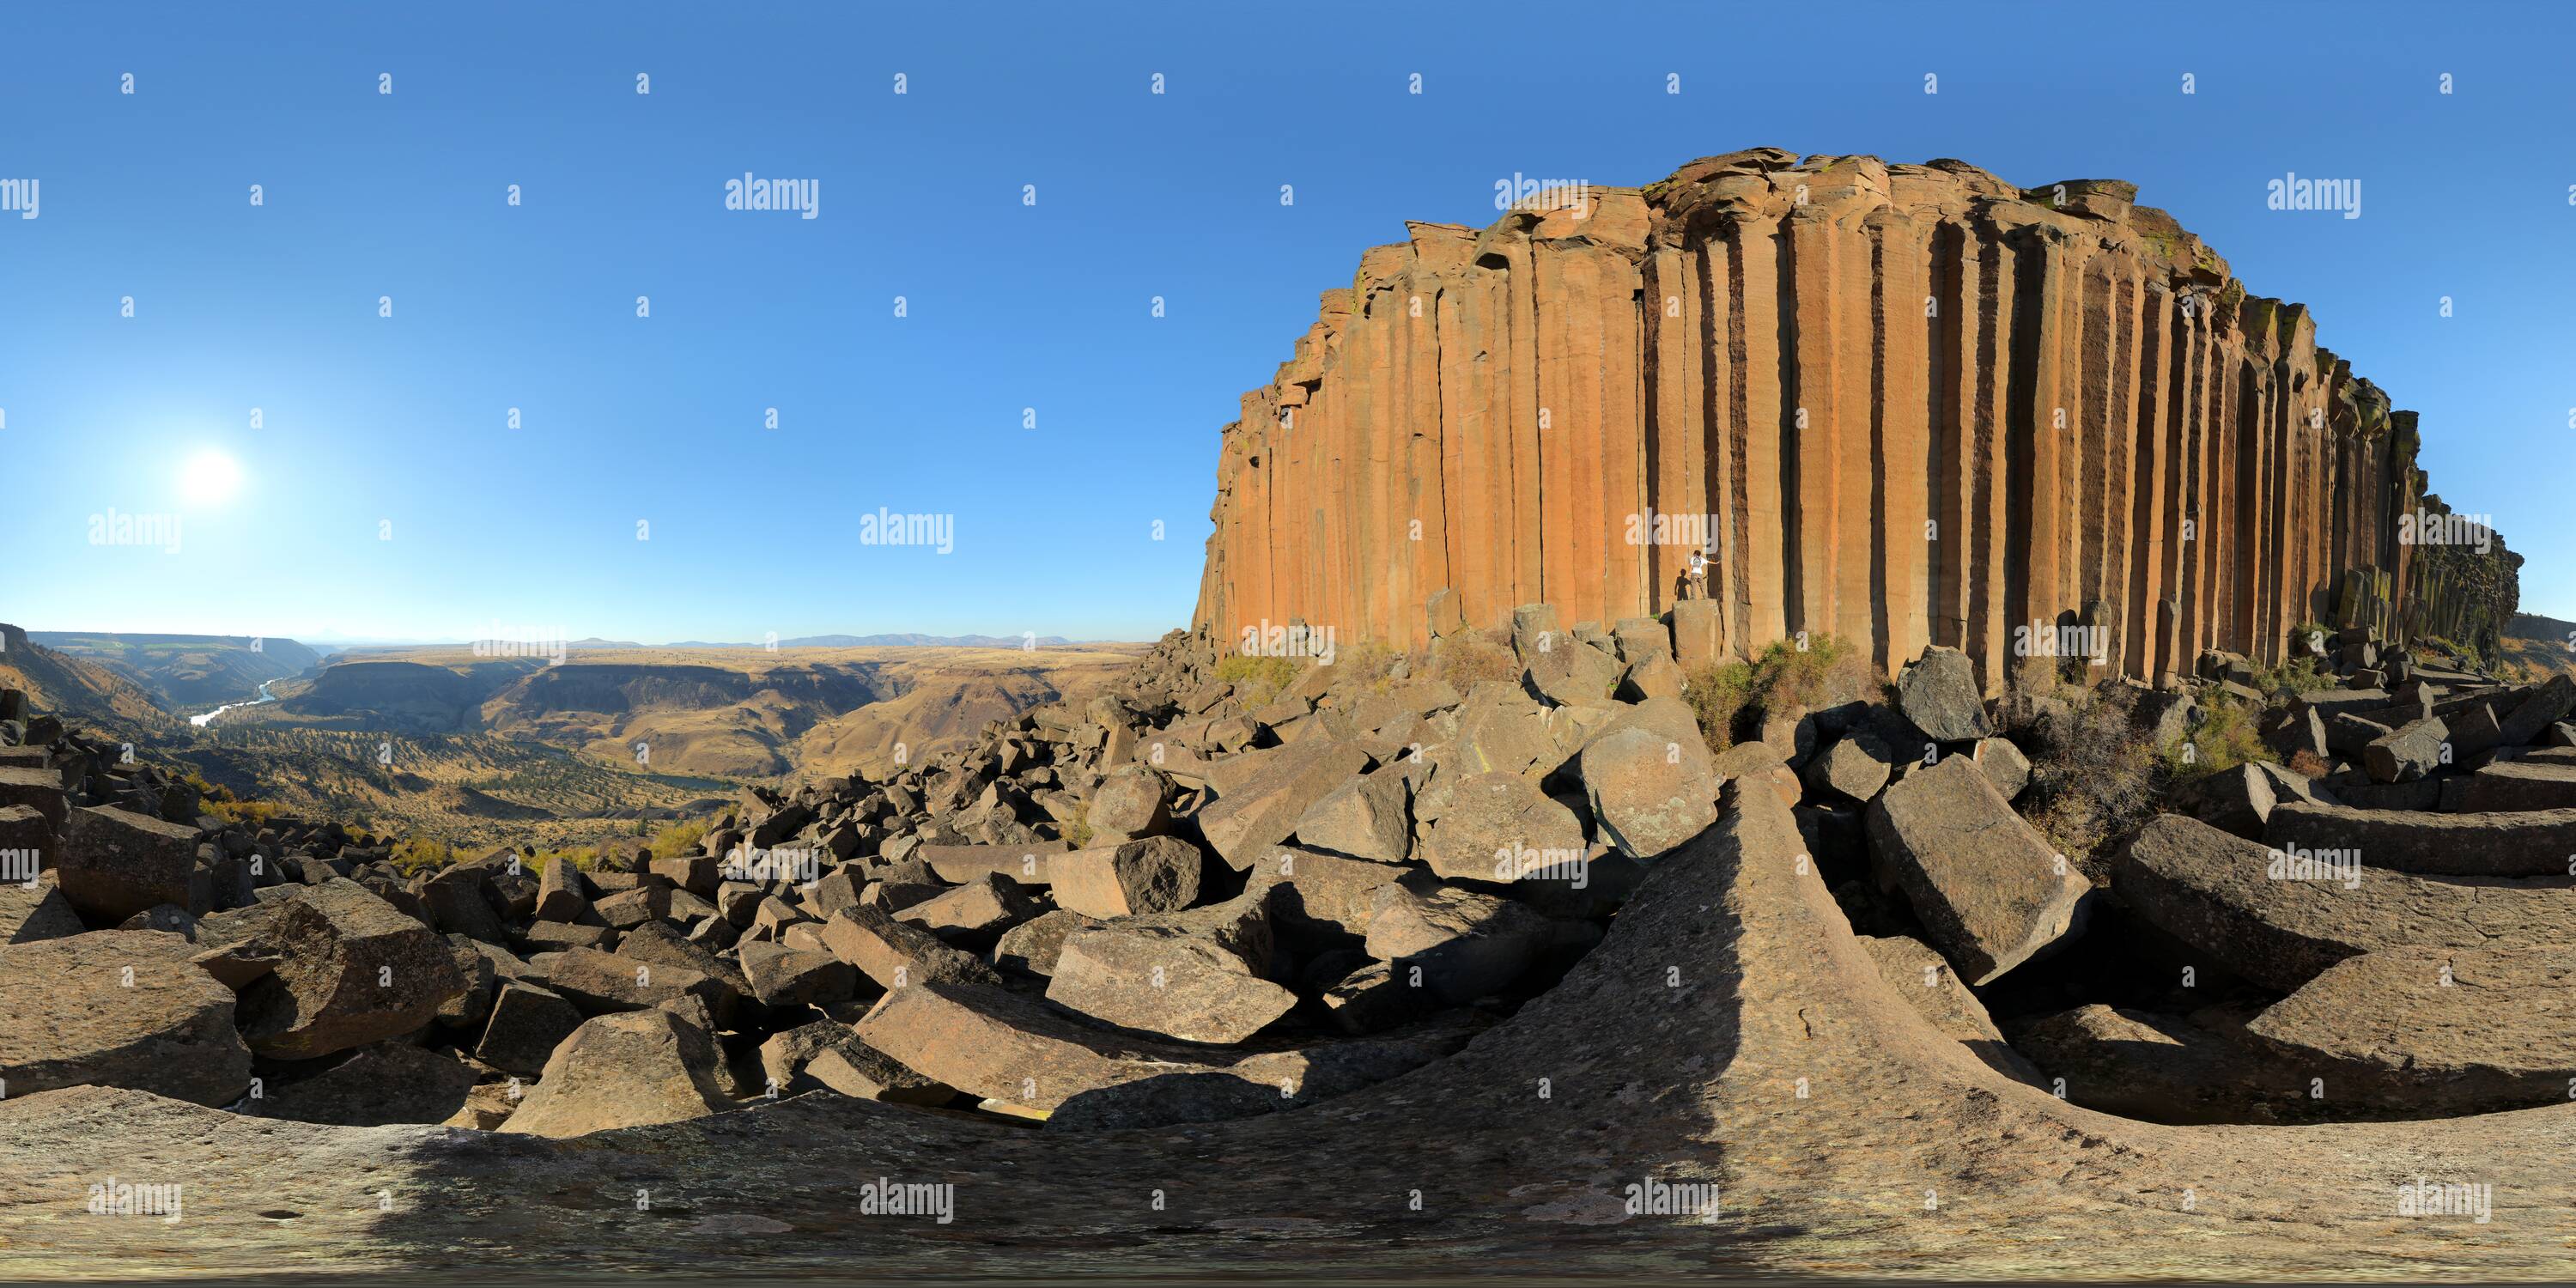 360 degree panoramic view of Trout Creek basalt columns, Madras, OR, USA [1]